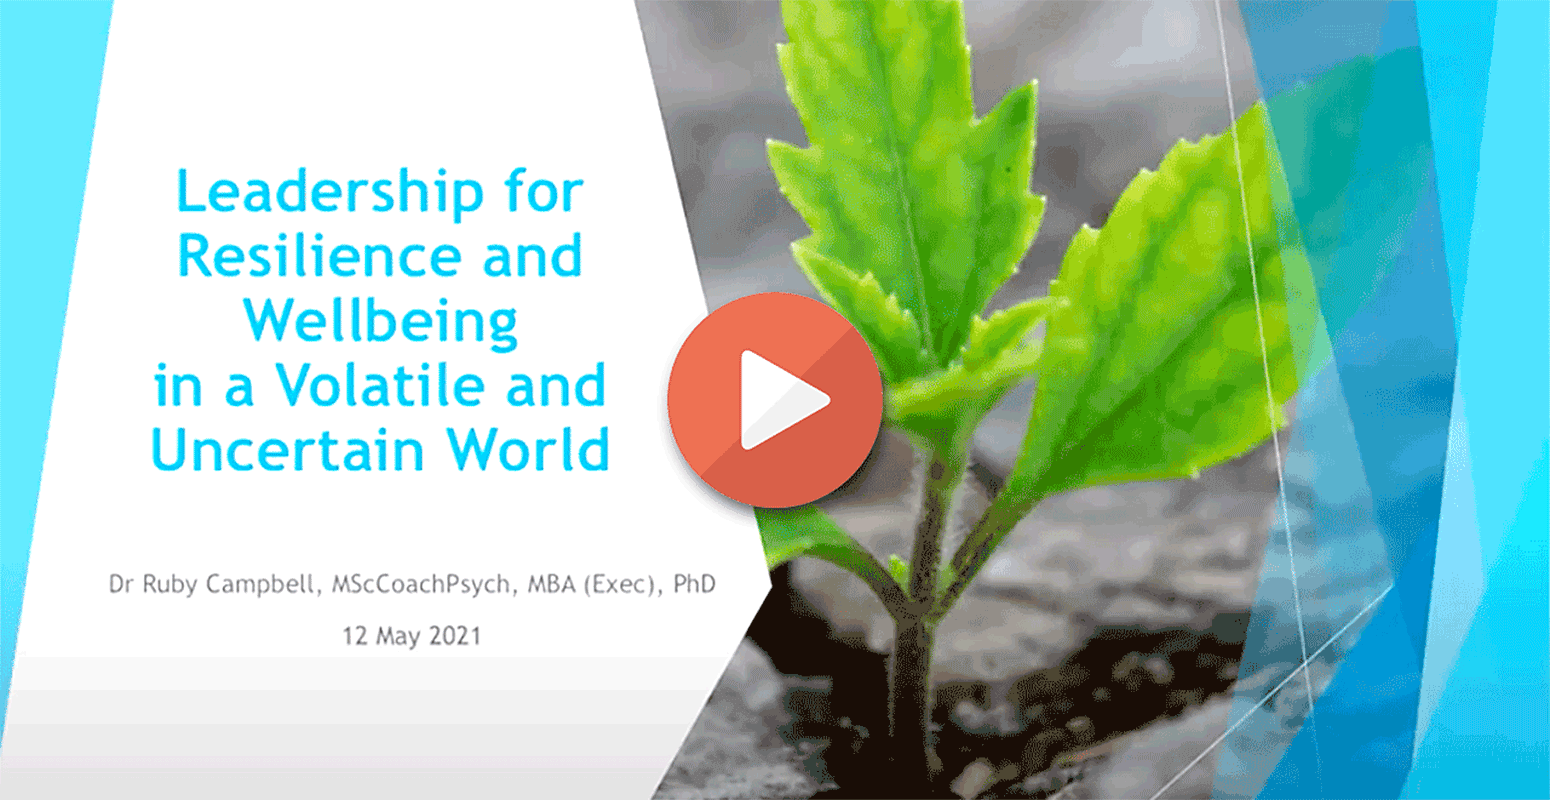 Leadership for Resilience and Wellbeing in a Volatile and Uncertain World